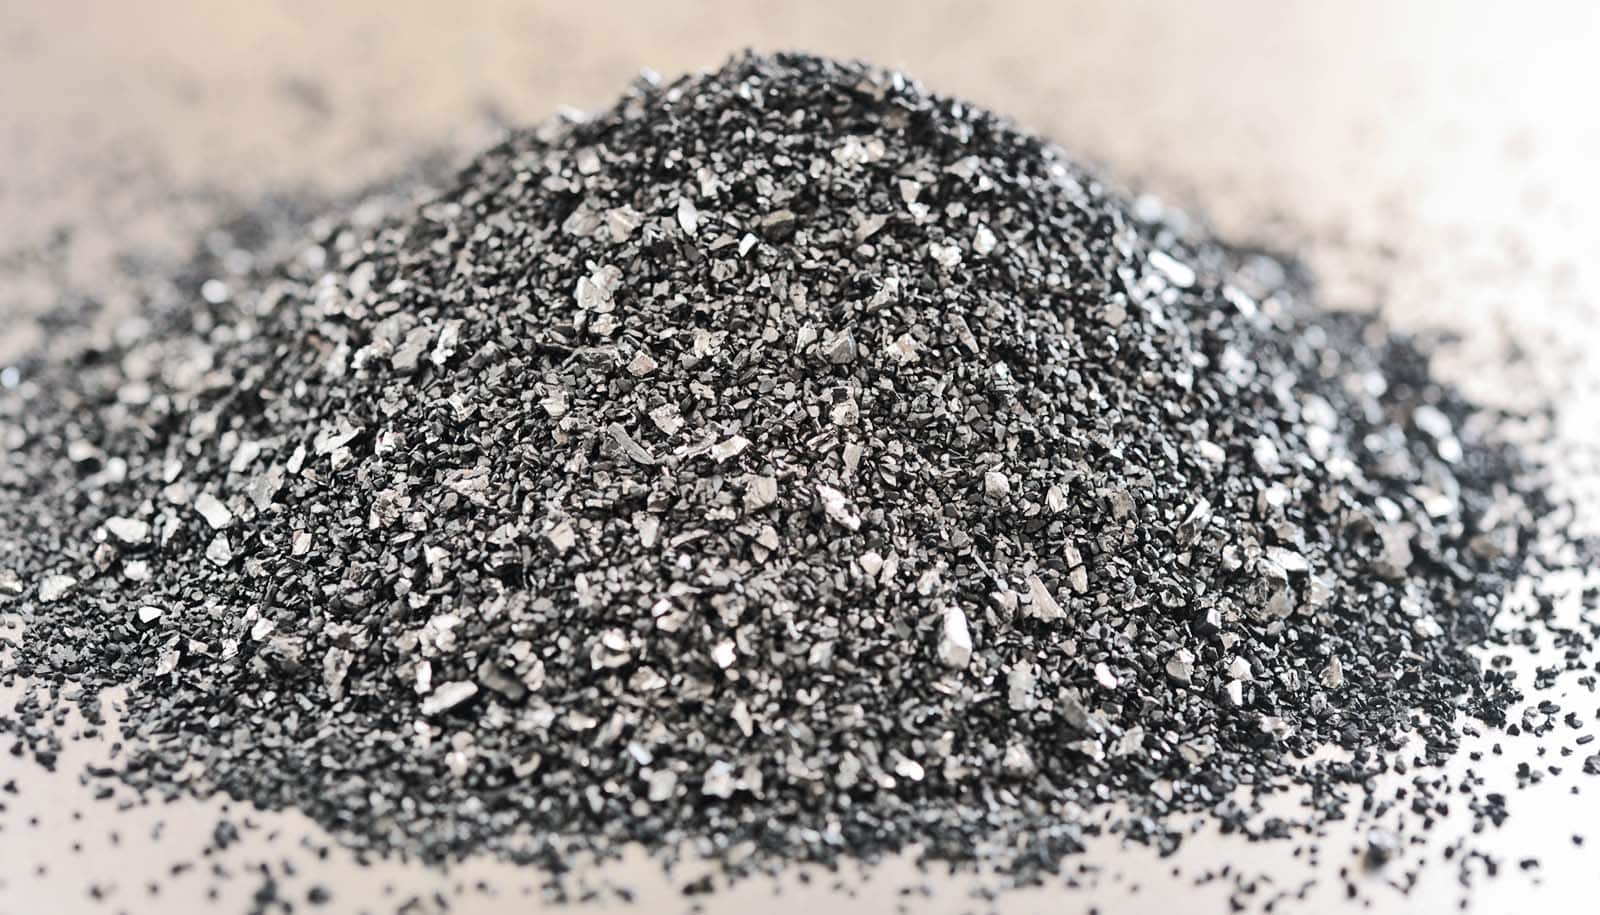 How activated carbon could get toxins out of soil - Futurity